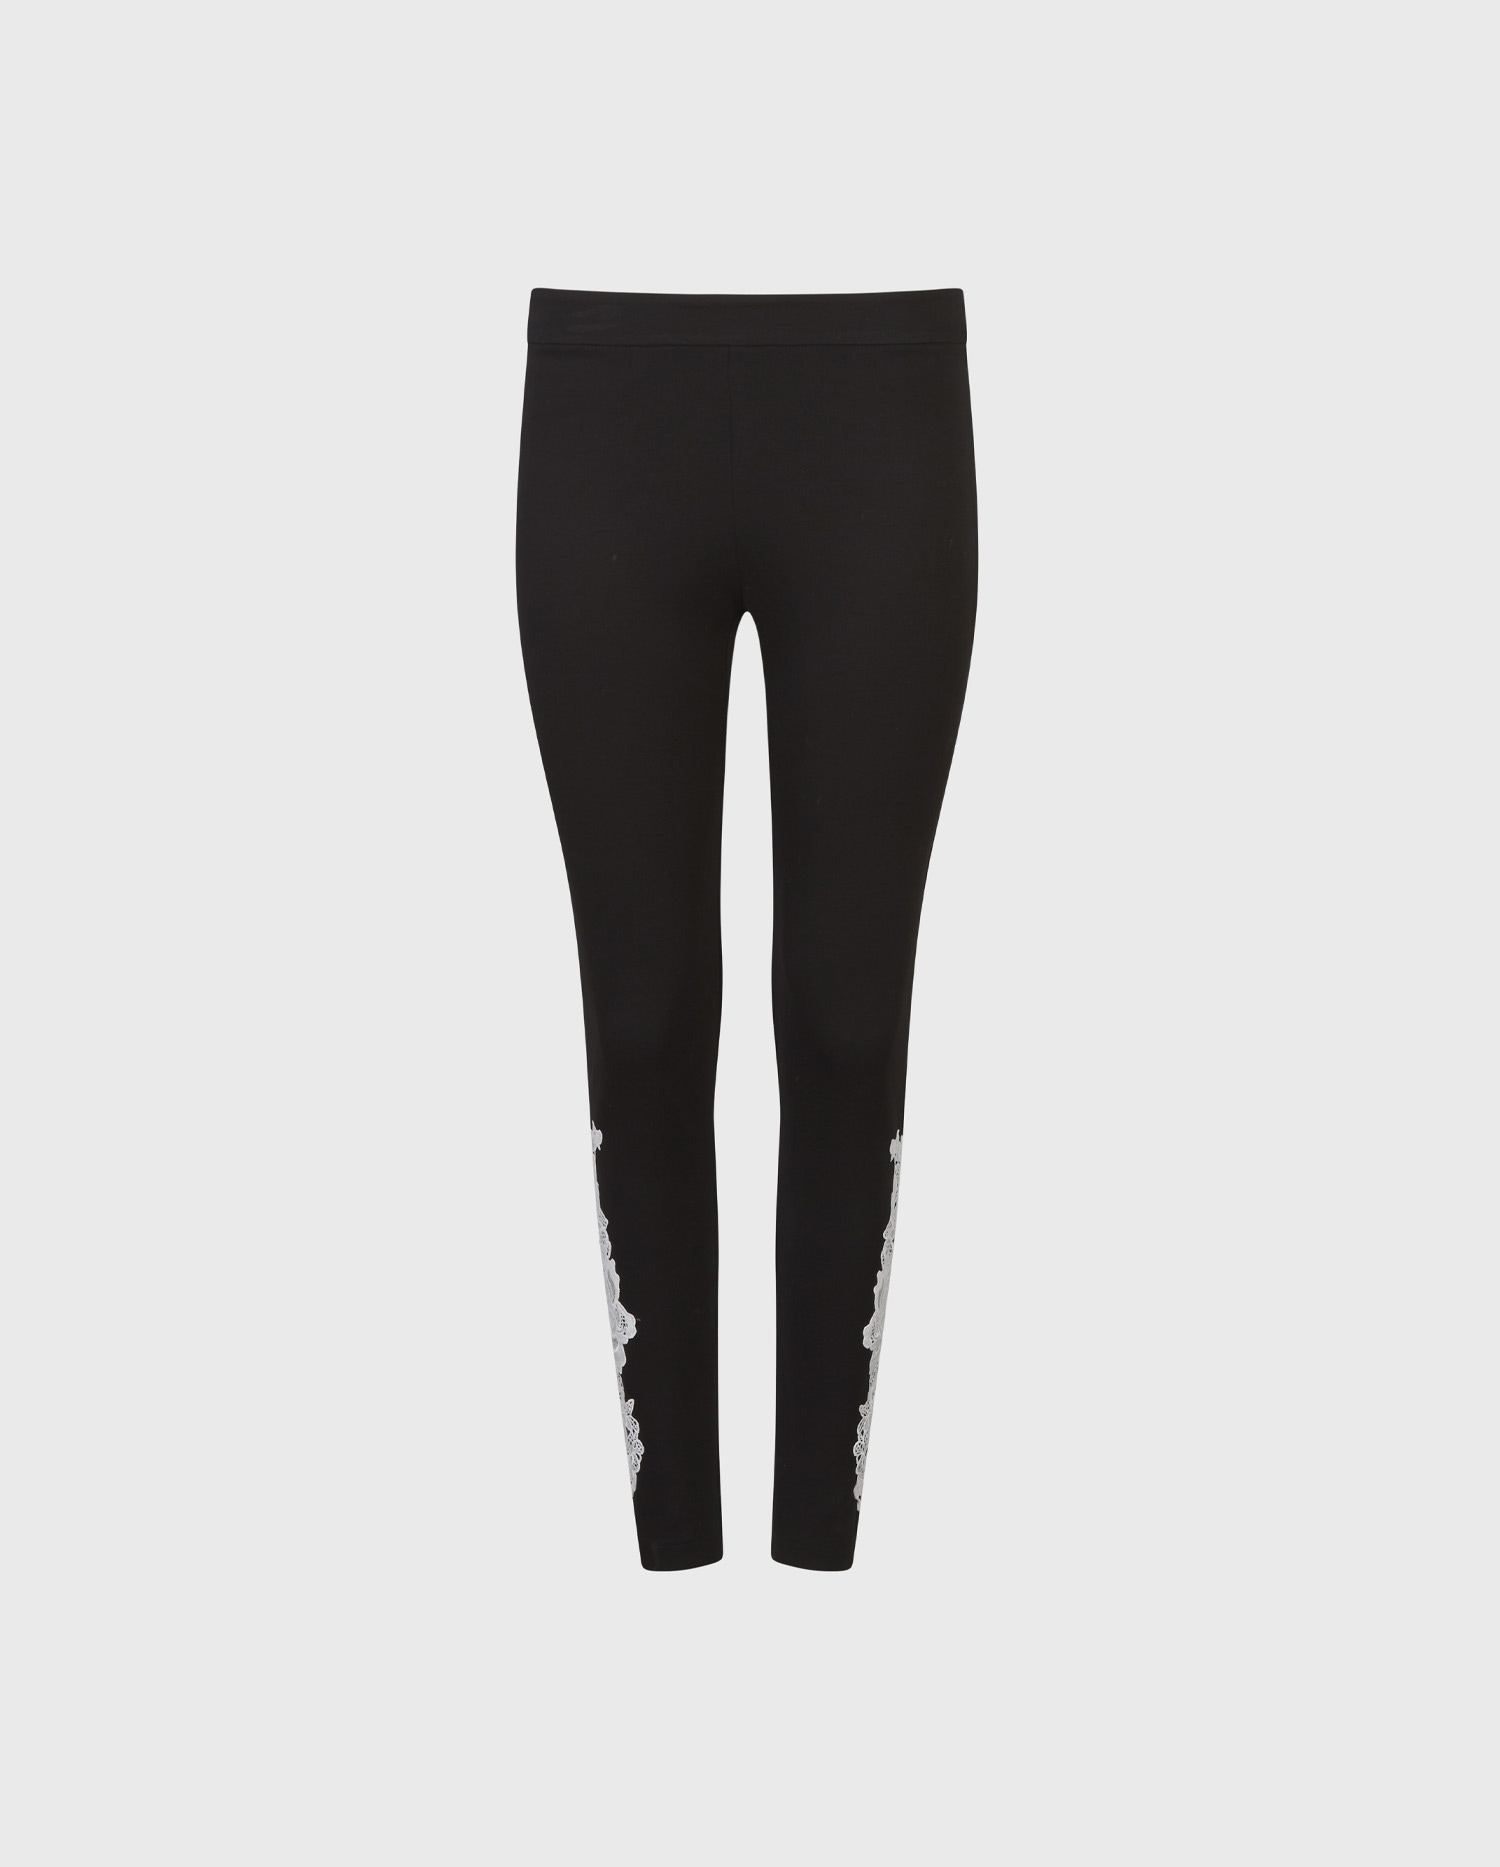 Shop the Black Lucile Knit Legging With White Lace Applique from designer Anne Fontaine